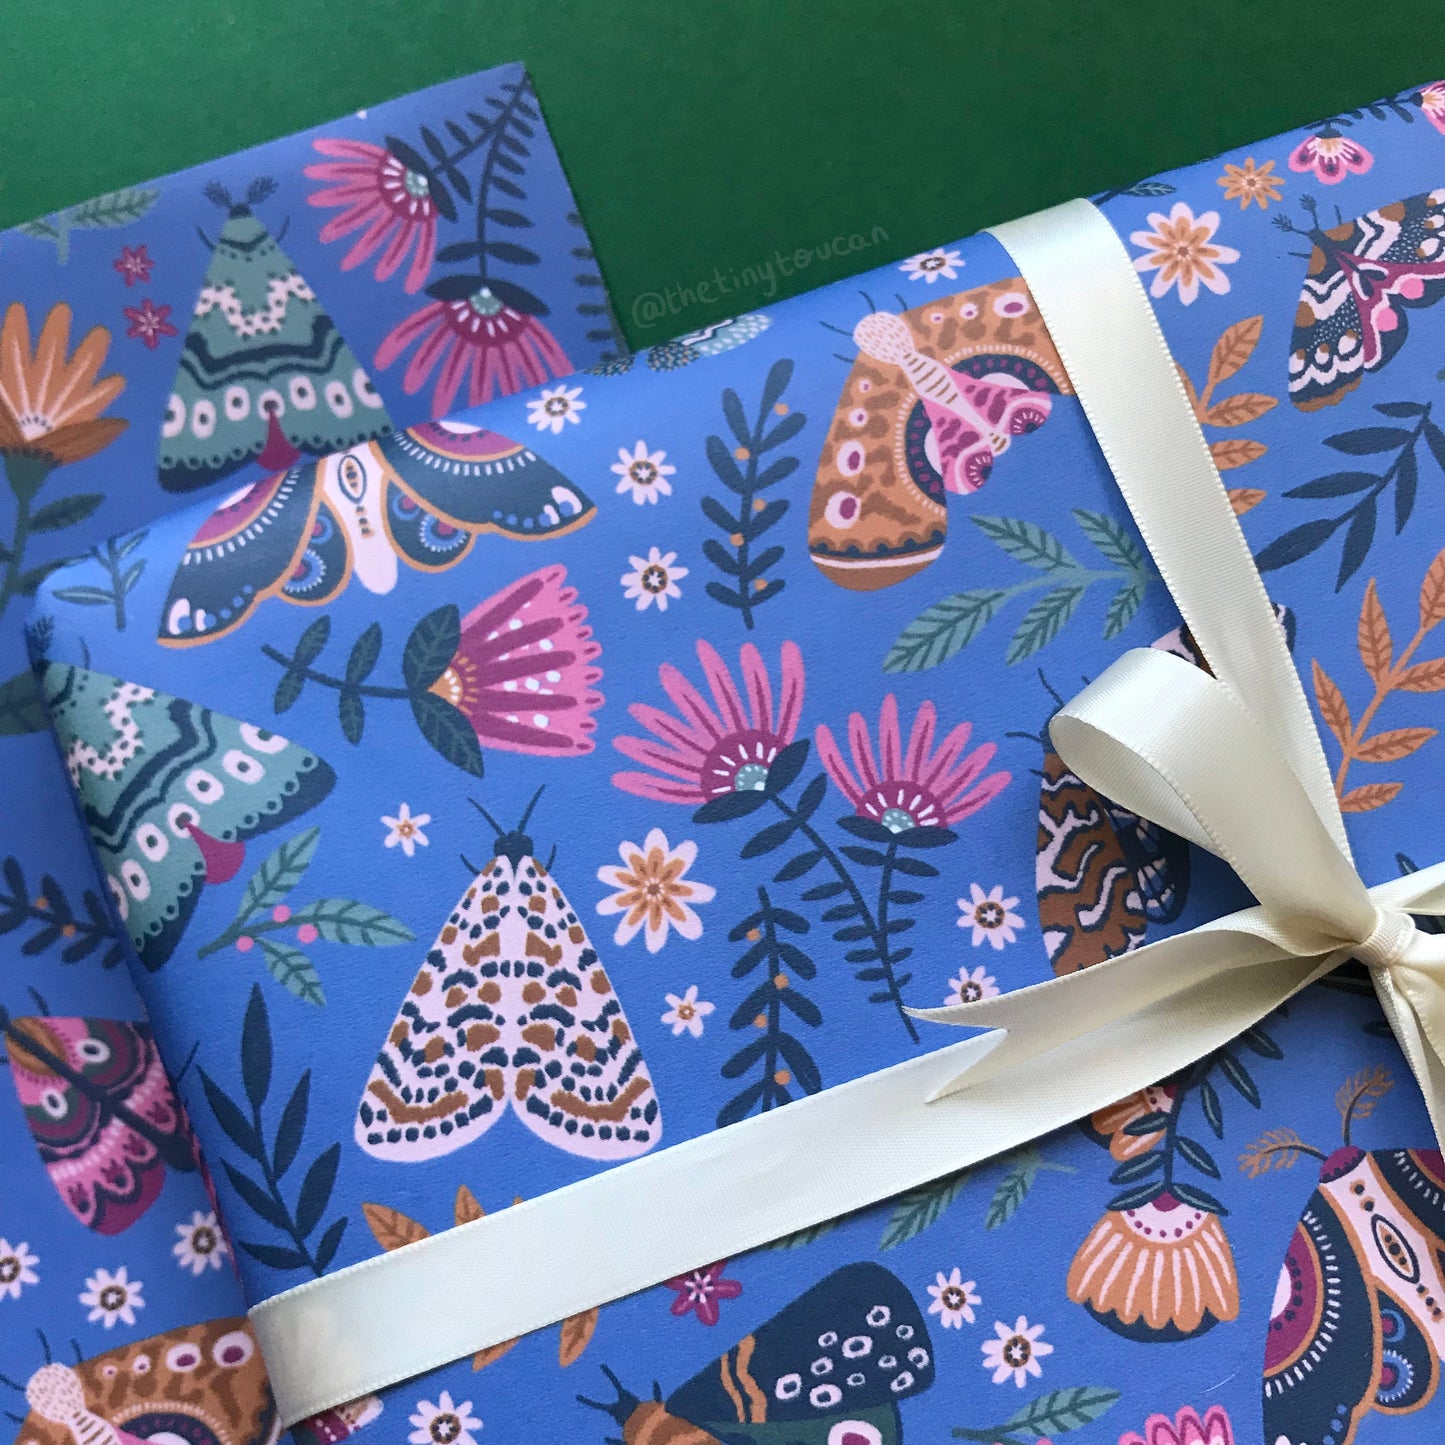 Moth Wrap- (A2+ Folded Sheet) Moth illustrated wrapping paper- Butterfly- Pretty Stationery- Gift Wrap- Moth gift- sustainable stationery